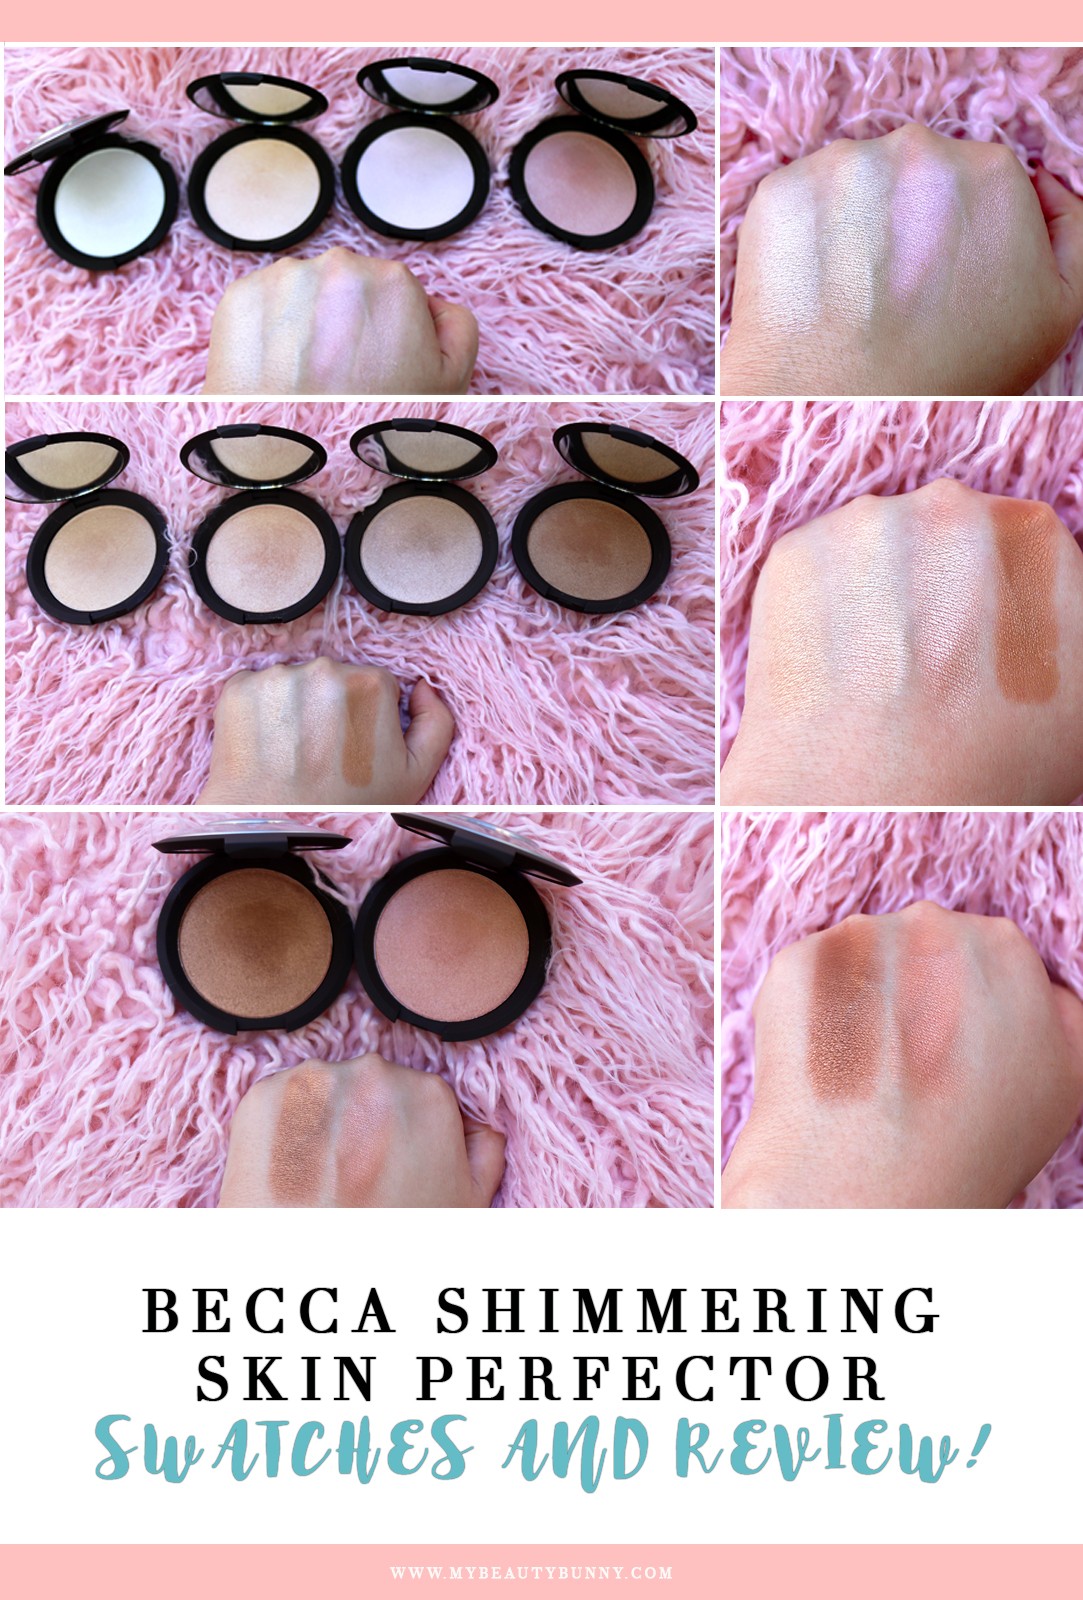 Becca Shimmering Skin Perfector Cruelty Free Highlighter Review and Swatches by Los Angeles Blogger, My Beauty Bunny